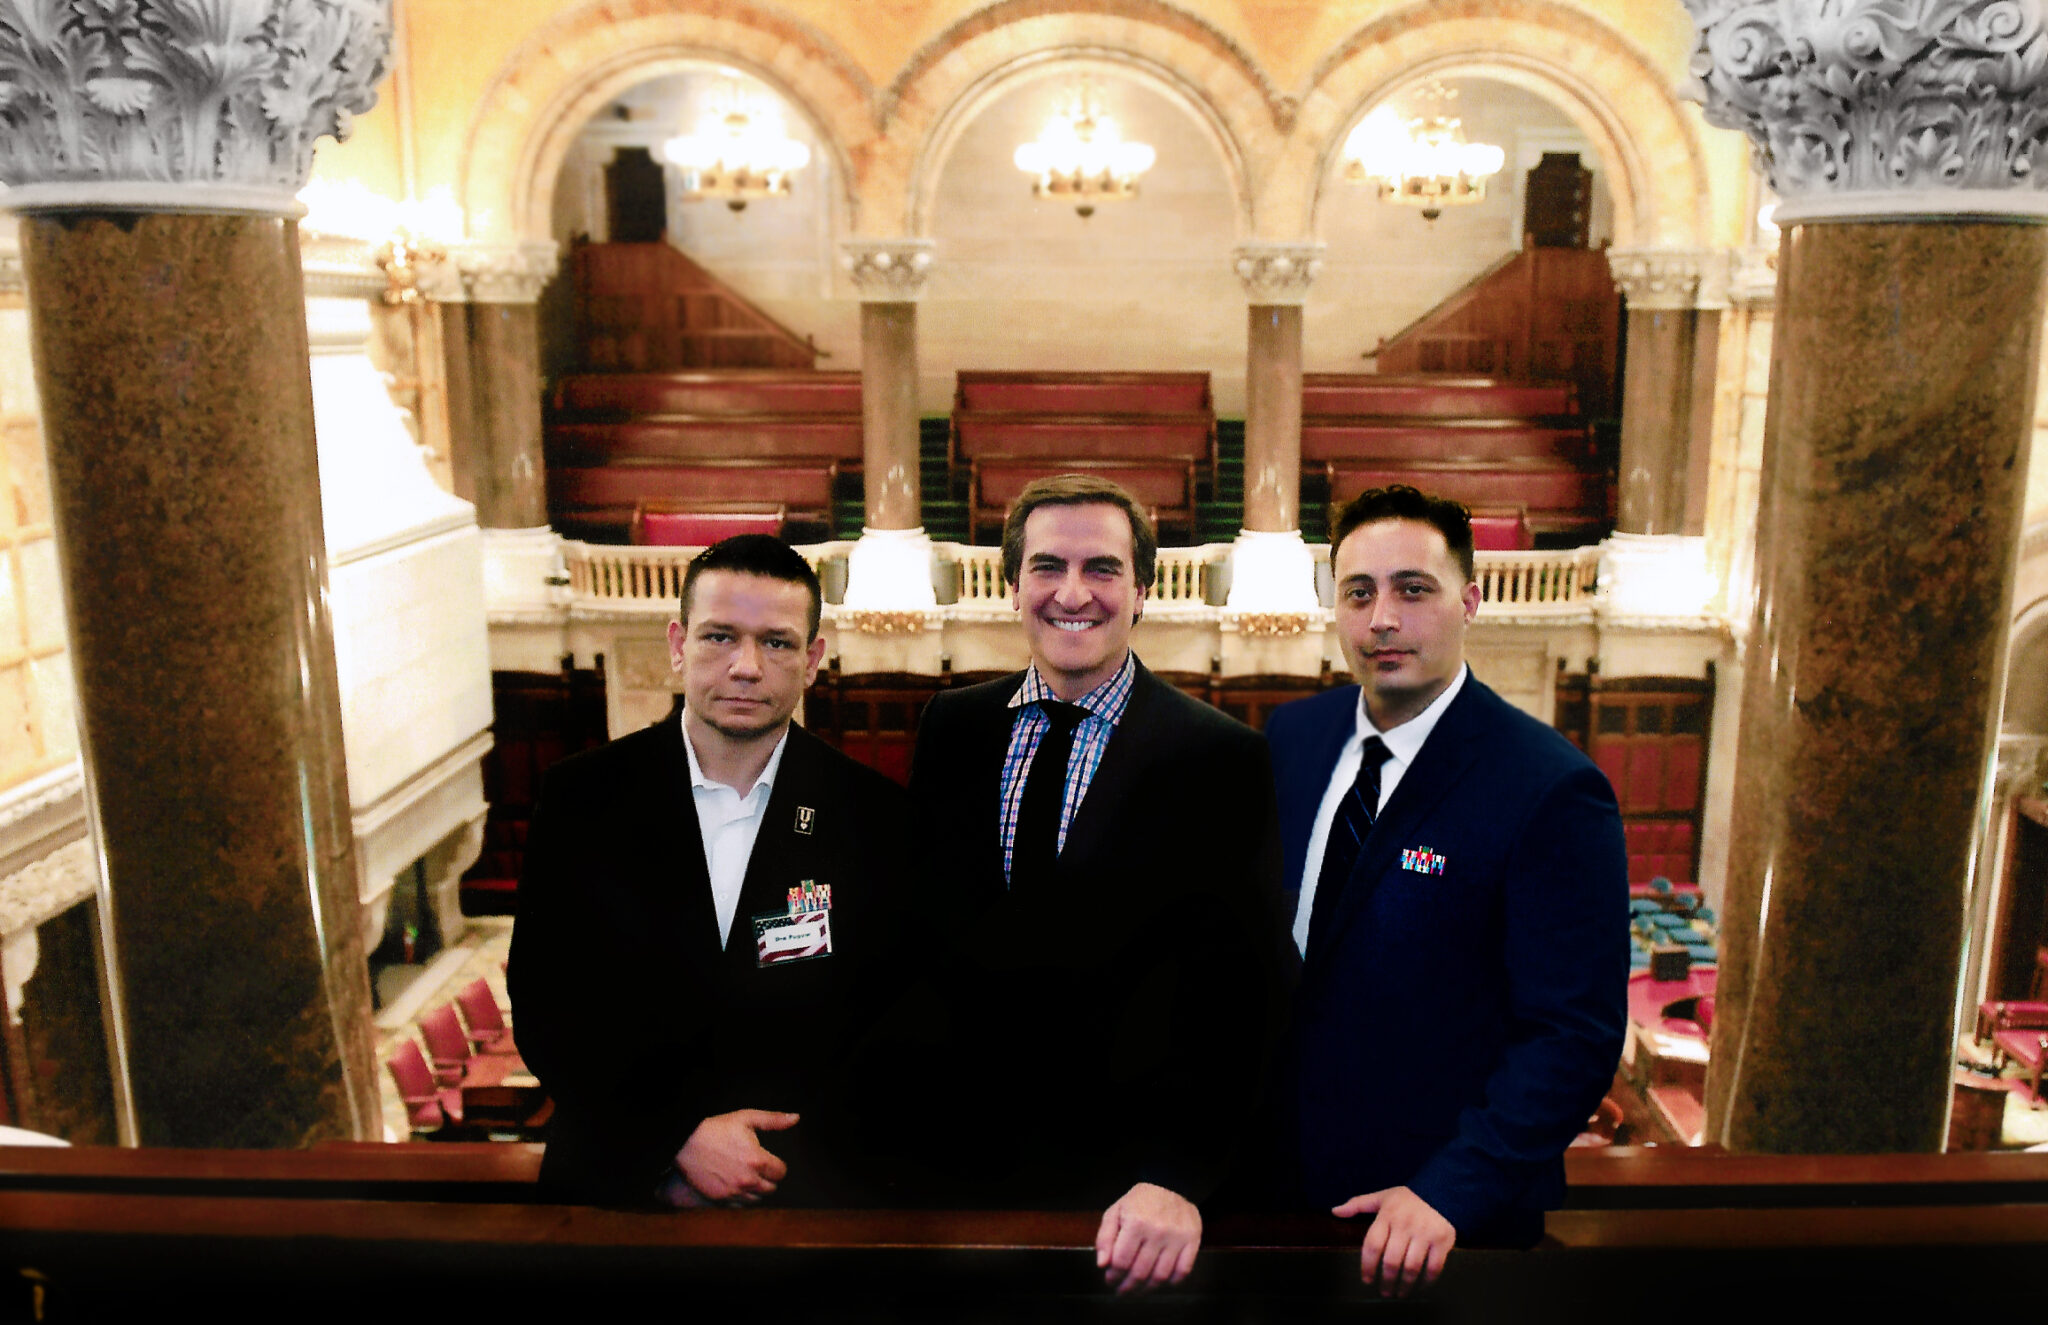 New York State Senate Senator Michael Gianaris, inducted Dre Popow of Veterans Rebuilding Life into the Veterans Hall of Fame, at the state's capital building in Albany.